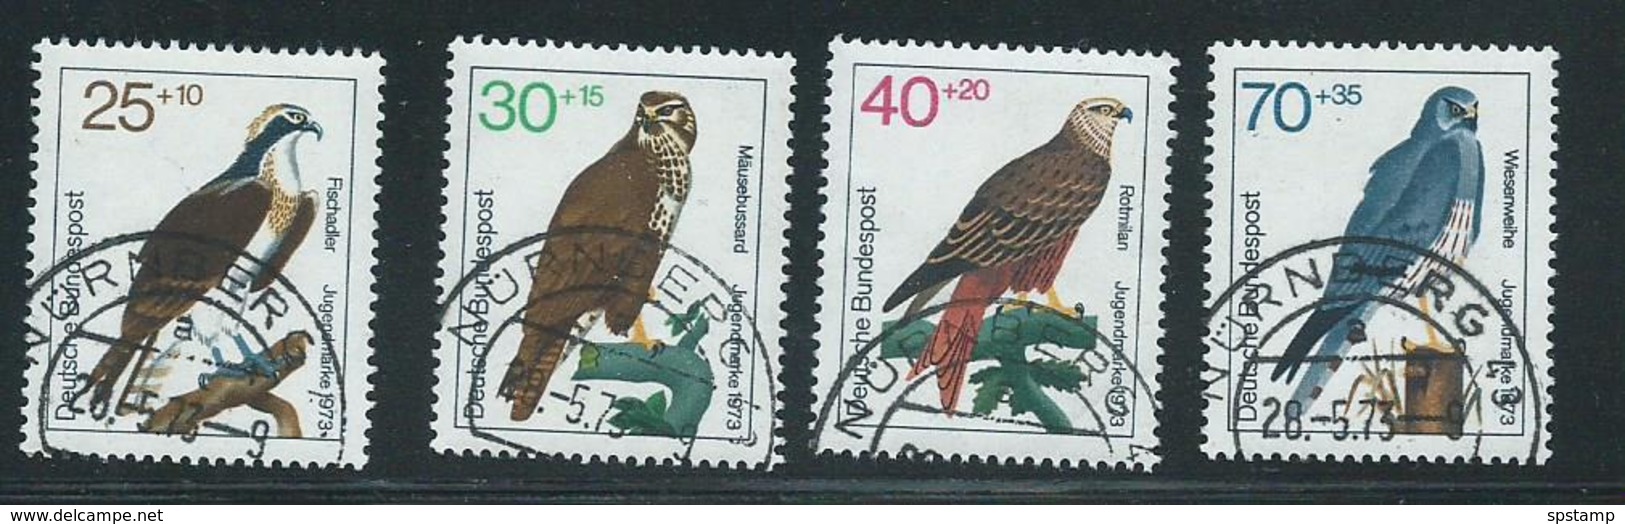 Germany 1973 Bird Charity Set 4 FU - Used Stamps